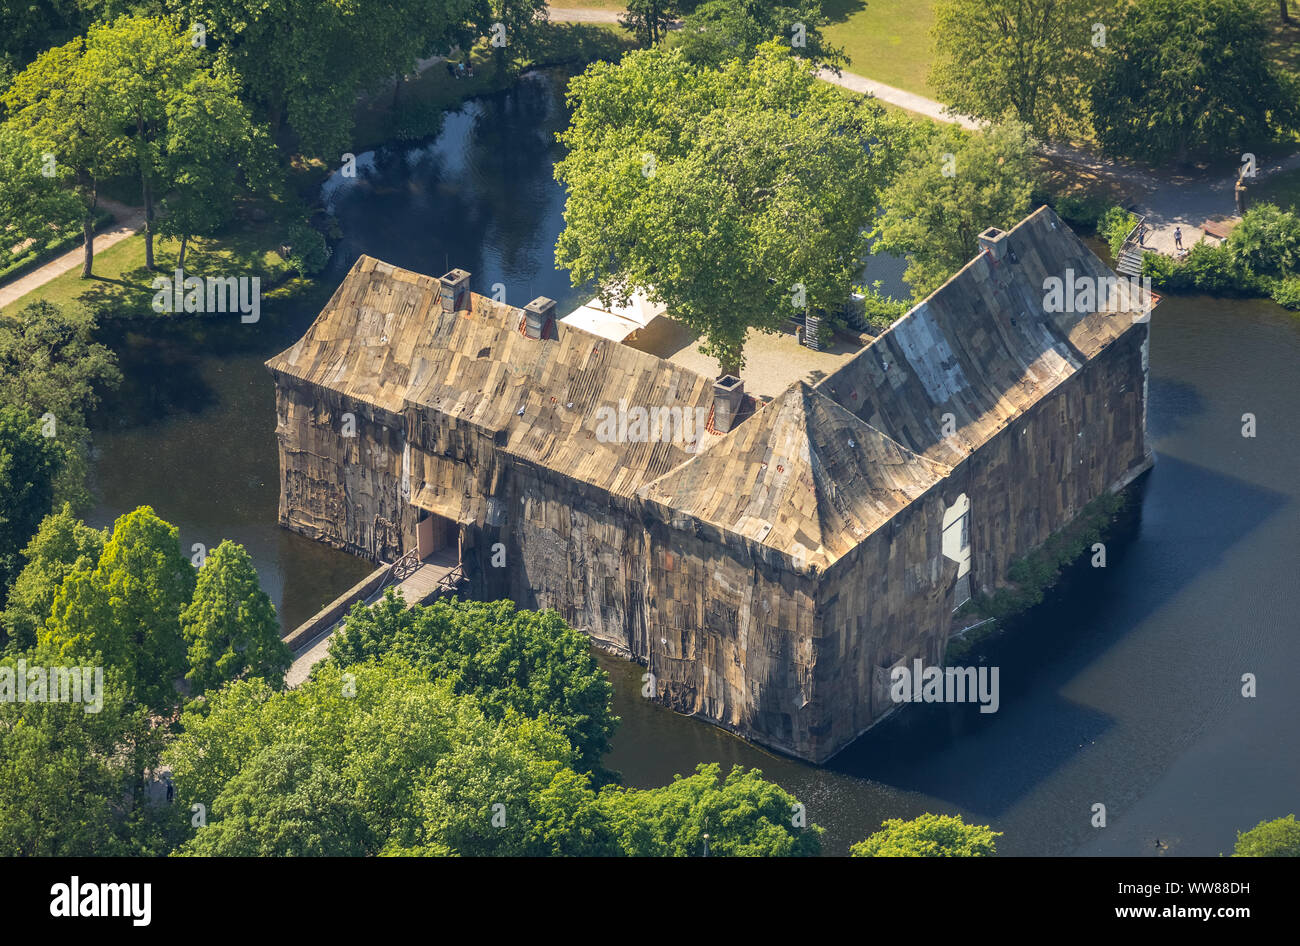 Aerial view, Emschertal Museum castle StrÃ¼nkede, art action Ghanaian artist Ibrahim Mahama, cladding of the castle StrÃ¼nkede with jute sacks for the expiration of the coal age in the Ruhr area, Herne, Ruhrgebiet, North Rhine-Westphalia, Germany Stock Photo